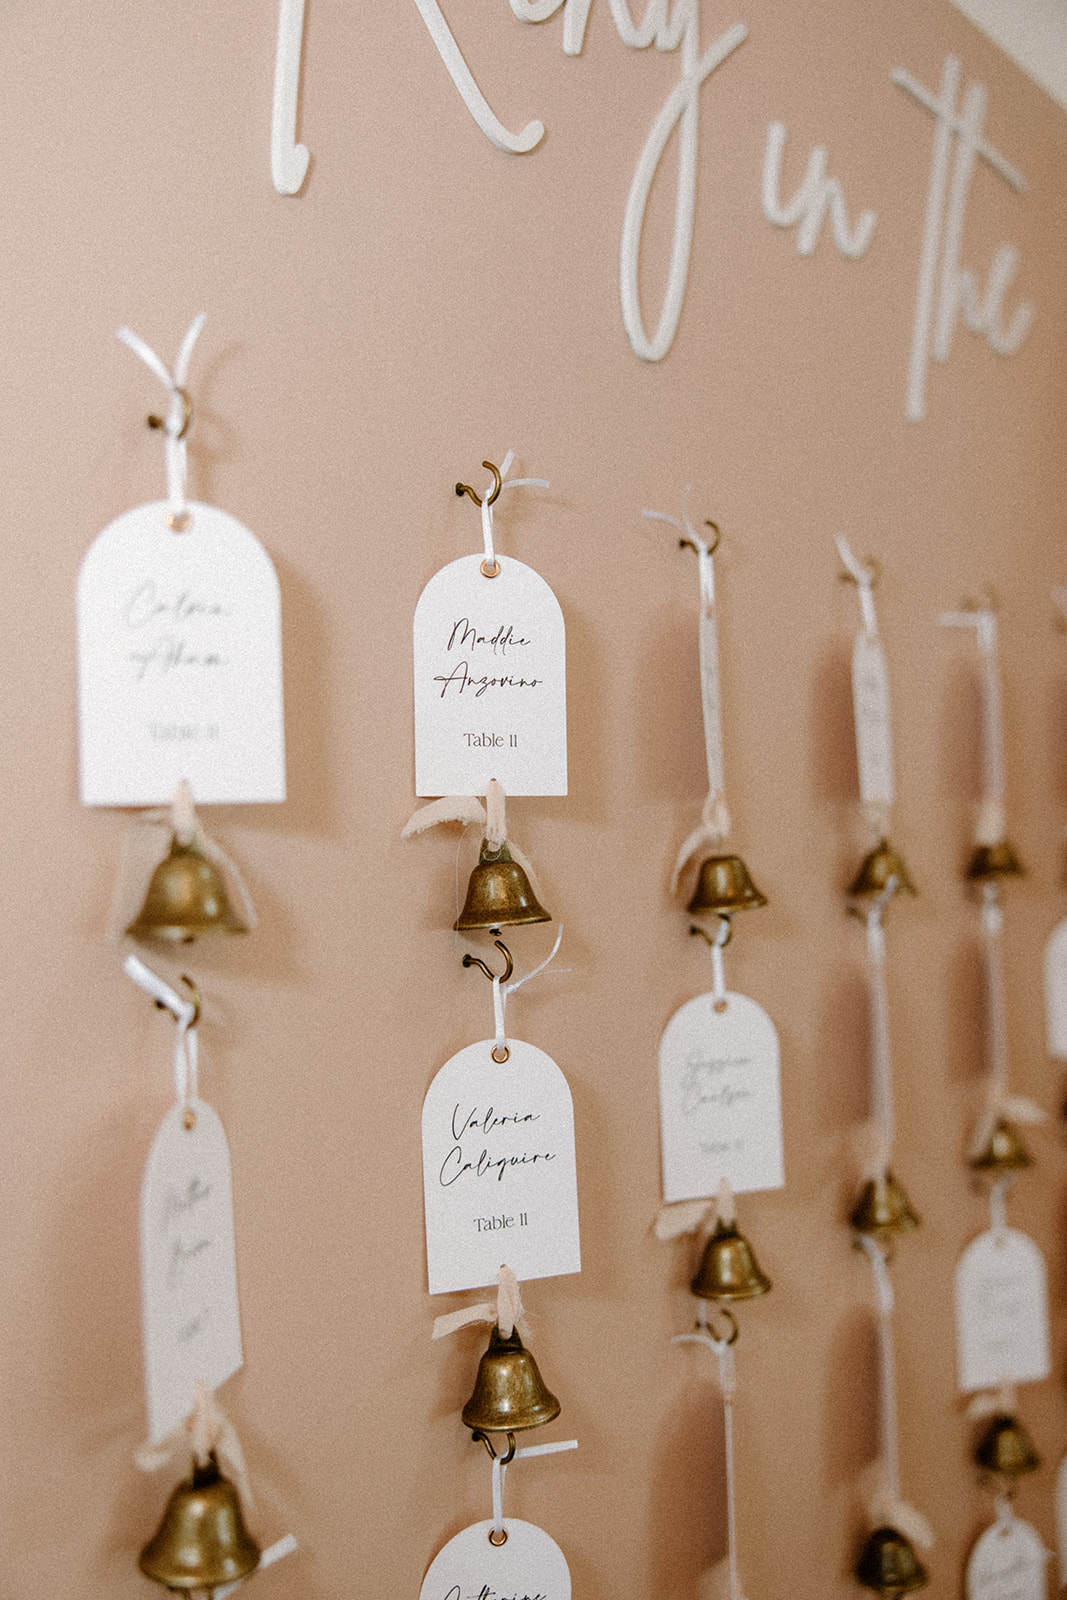 Golden Bell seating chart as a unique wedding details 